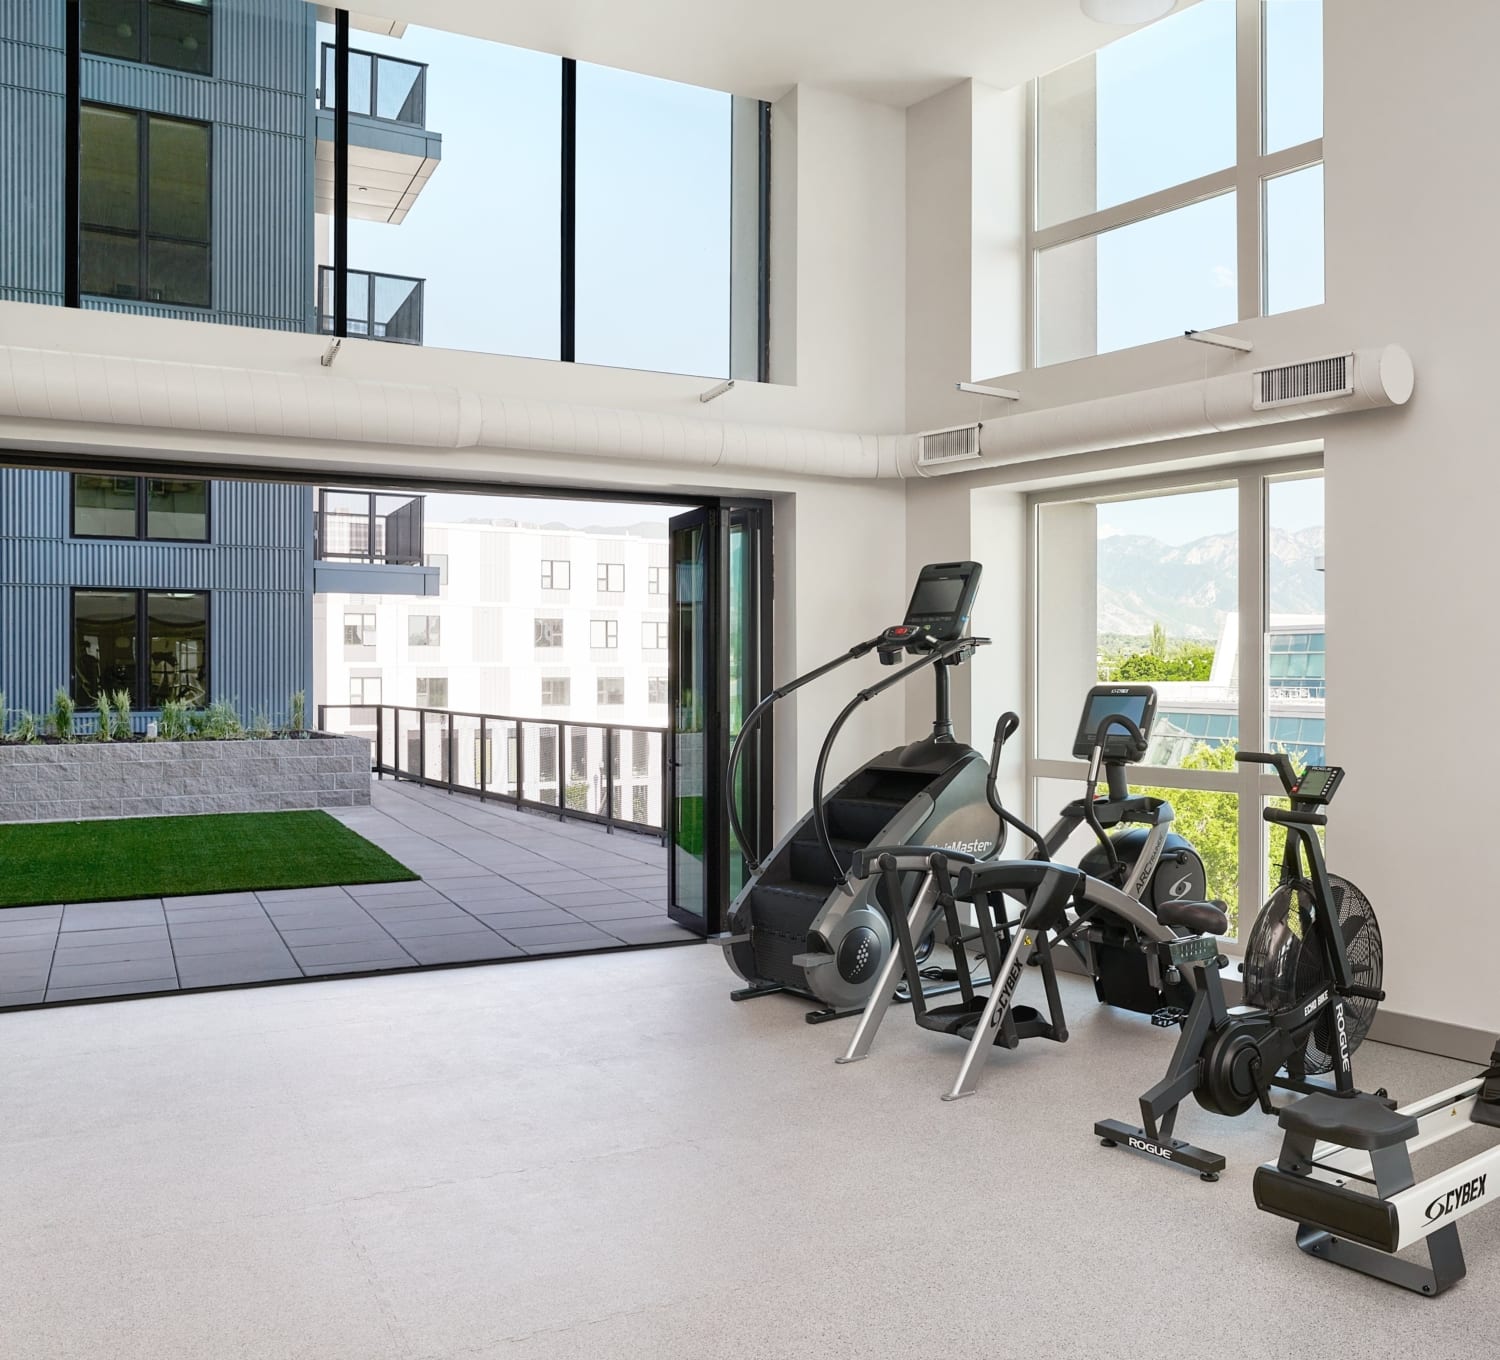 Fitness center with large windows and cardio equipment at Avia apartment community in Salt Lake City